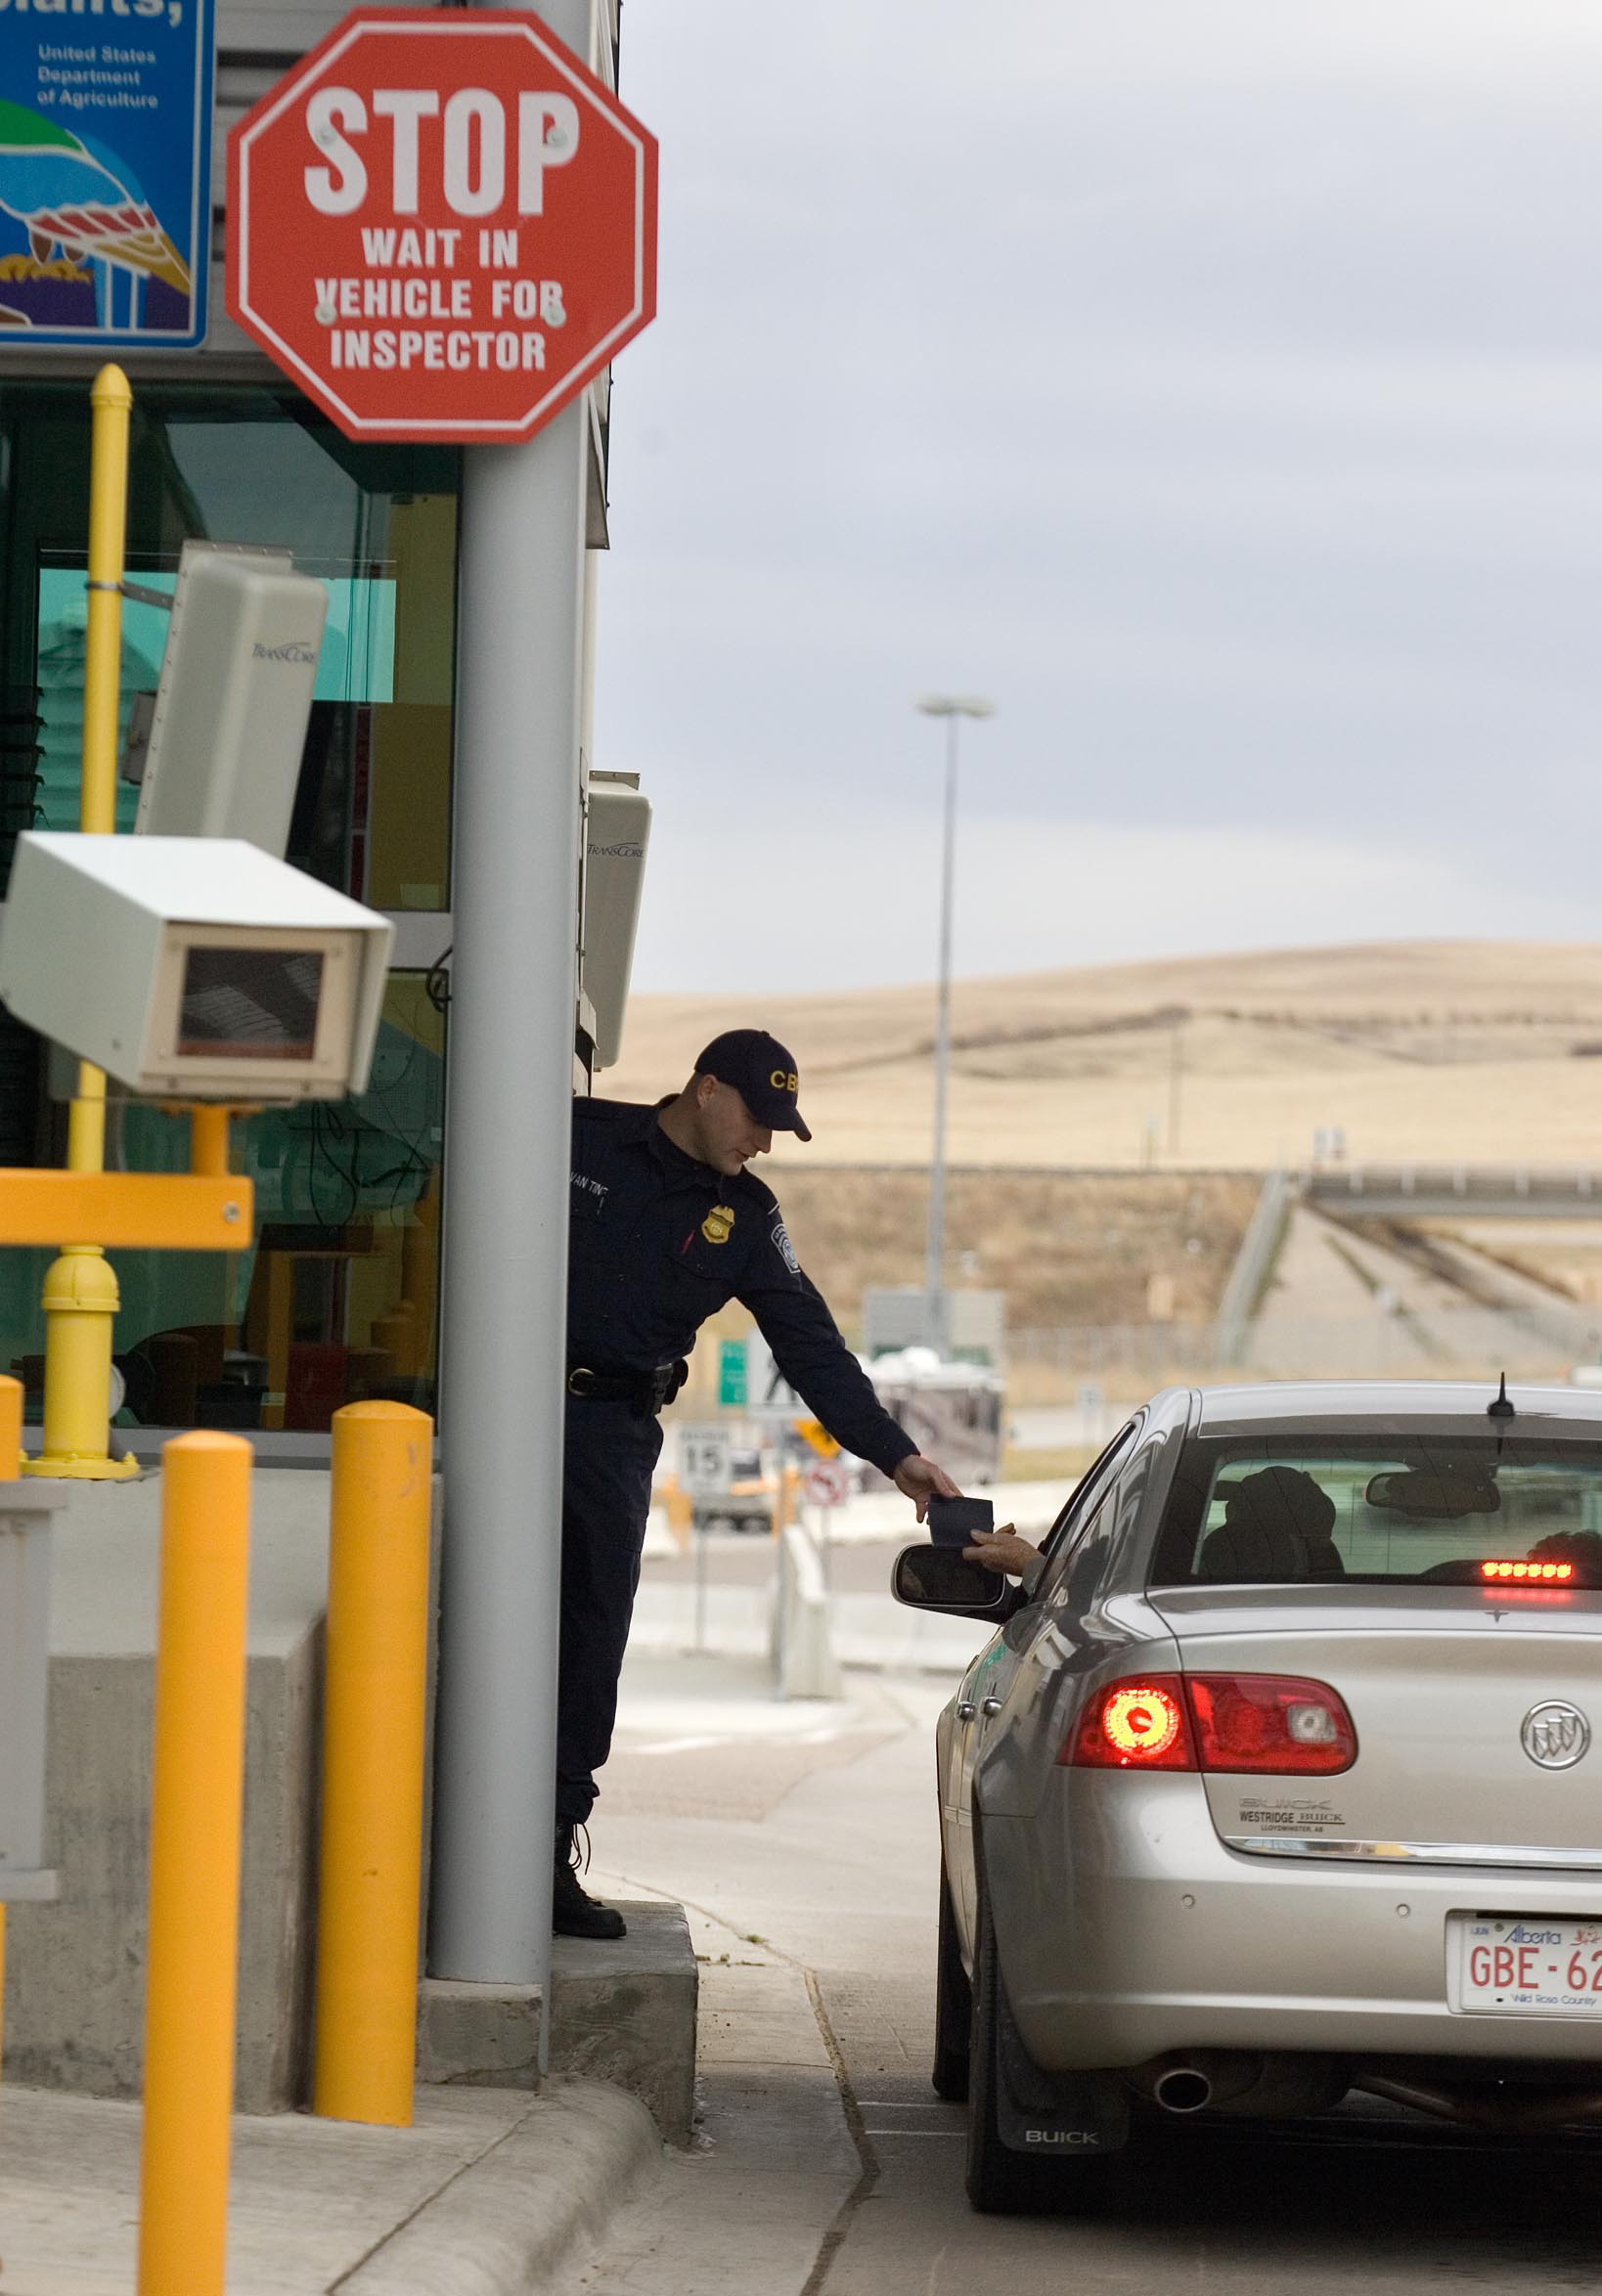 CBP officer checks documents at the Sweetgrass MT point of entry